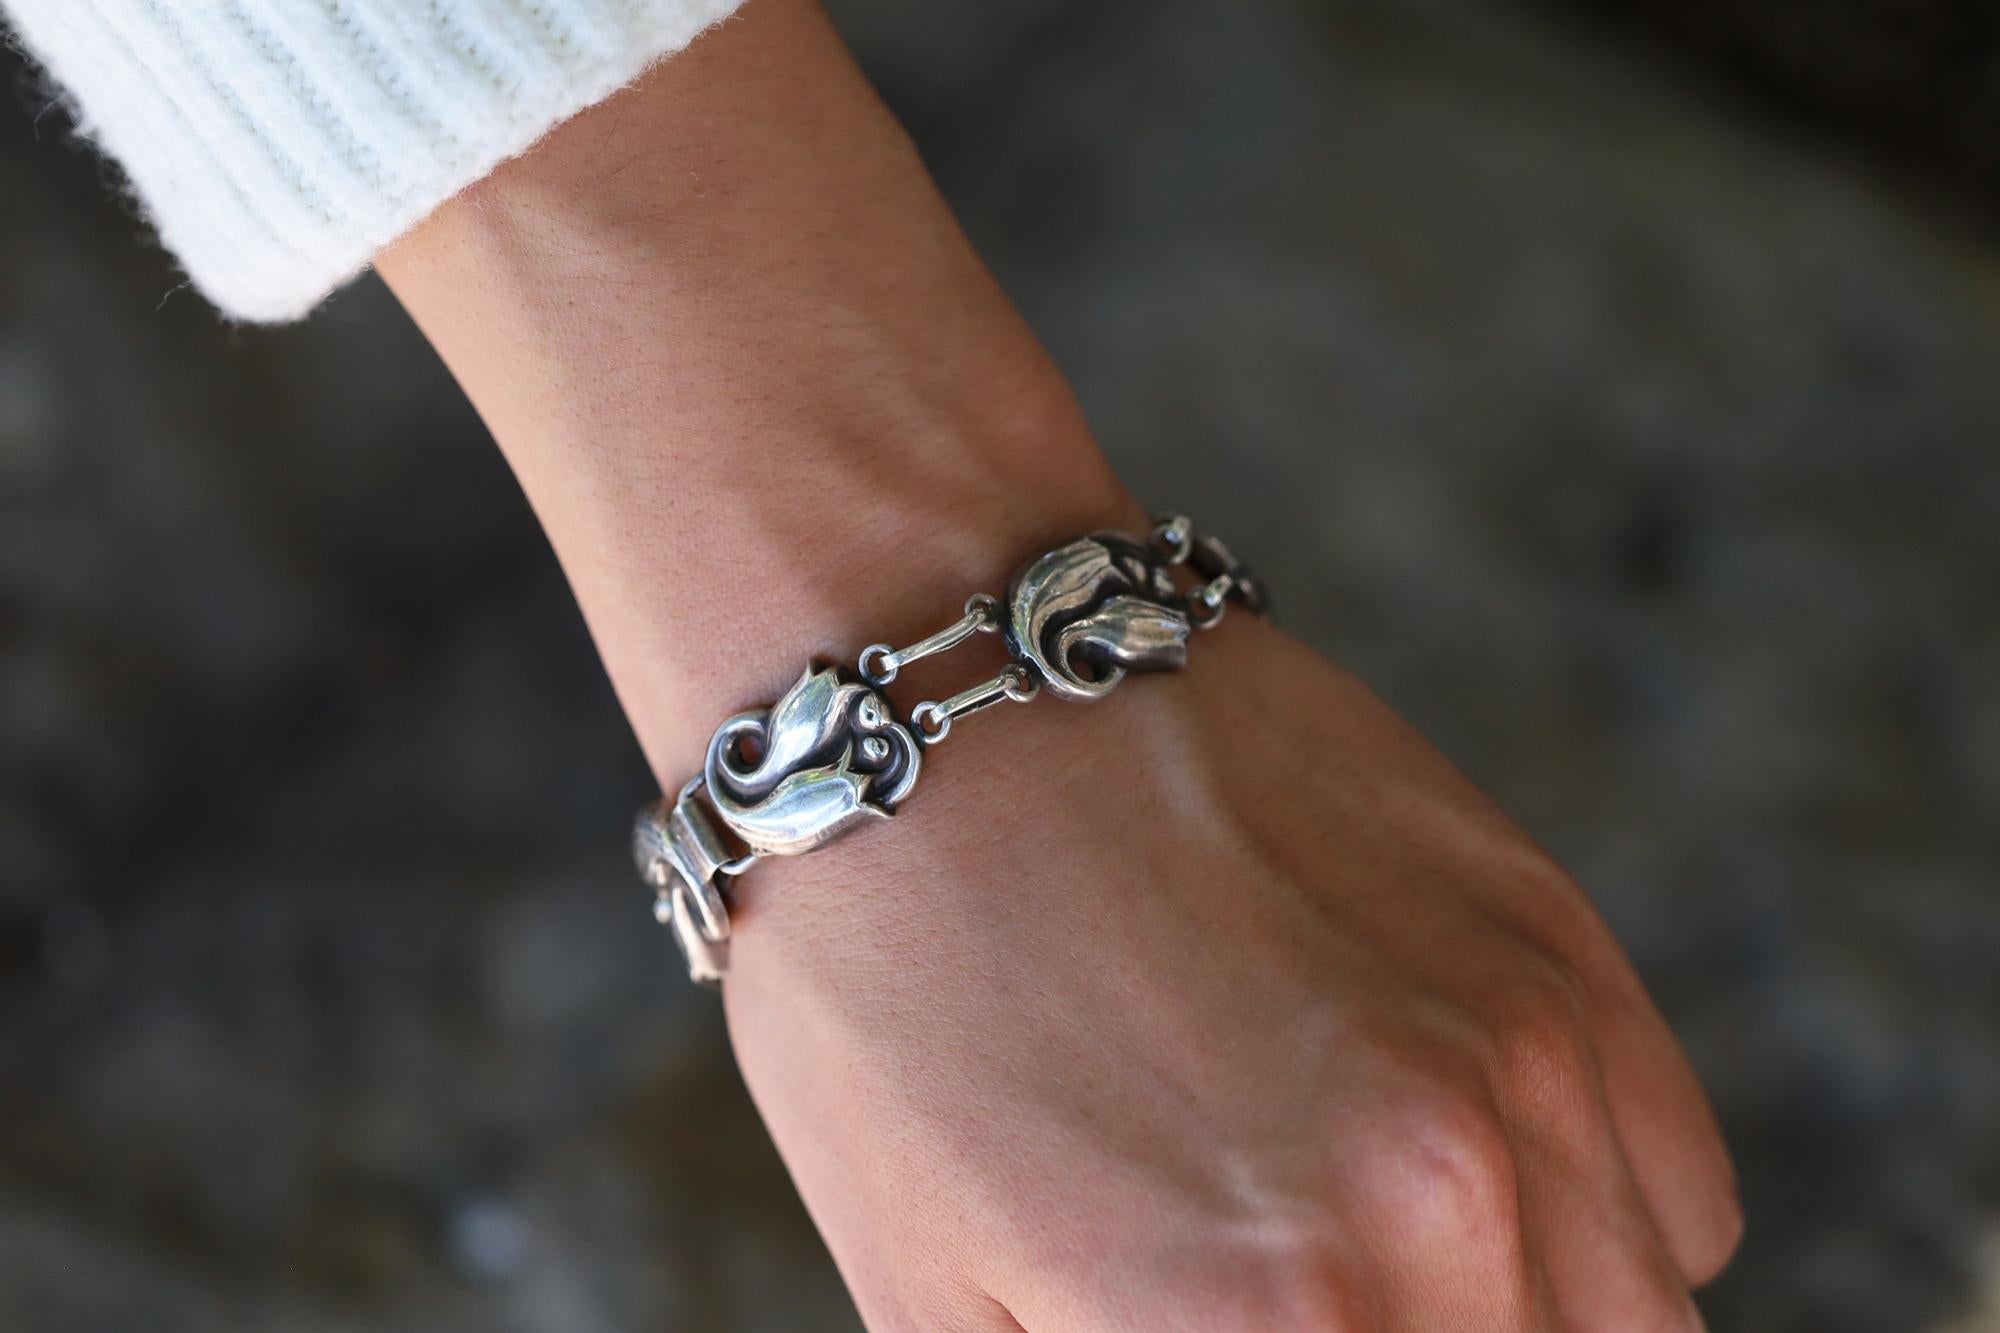 A classic Danish designer, Georg Jensen's jewelry has been coveted by collectors of Art Nouveau motifs for over a century. The iconic tulip design sterling silver bracelet from the La Paglia collection, number 100. The Georg Jensen company has